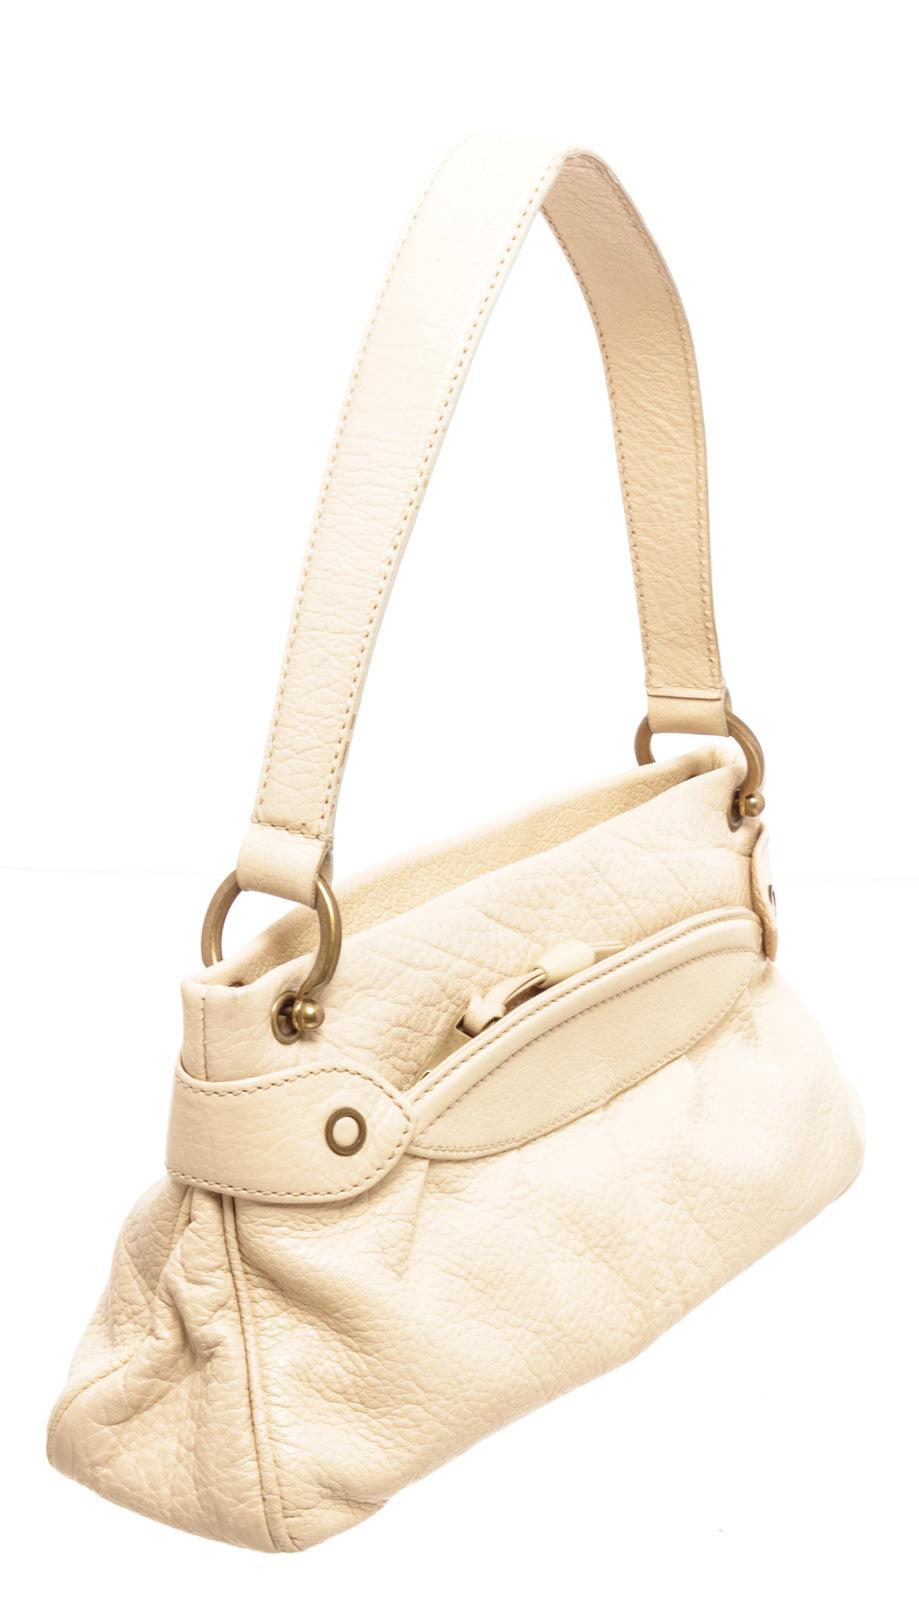 Marc Jacobs Cream Leather Shoulder Bag with gold-tone hardware, interior zip pockets, suede lining, leather shoulder strap, and zipper closure.

24589MSC